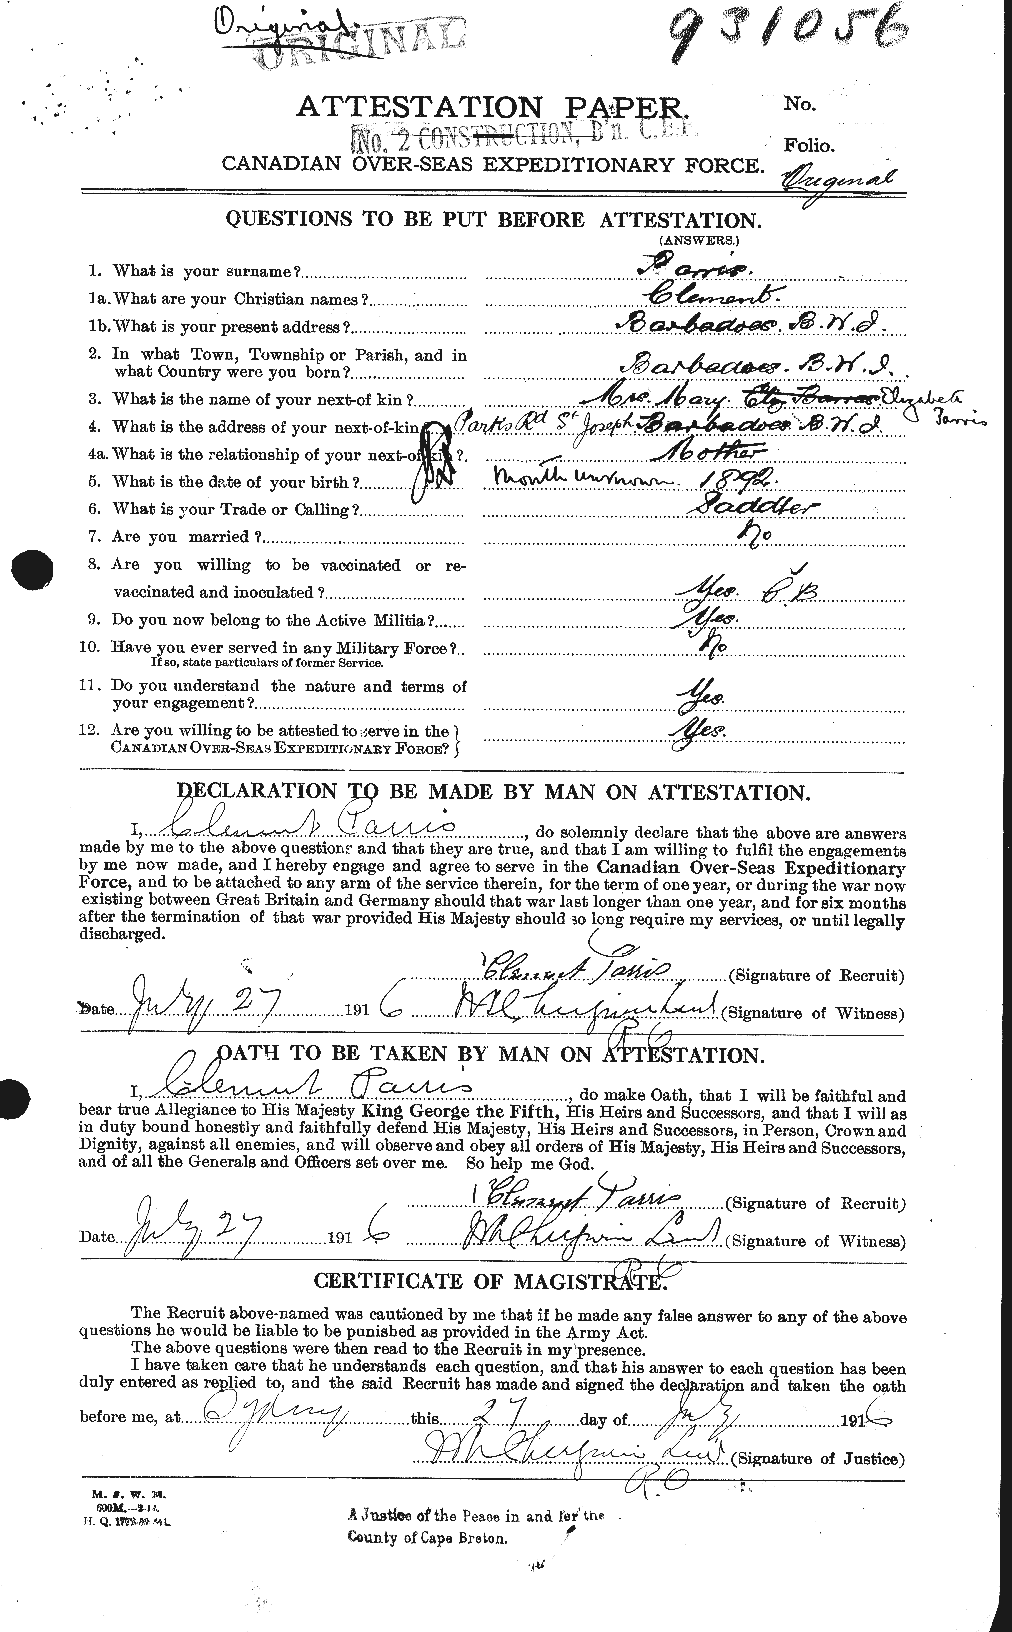 Personnel Records of the First World War - CEF 566502a